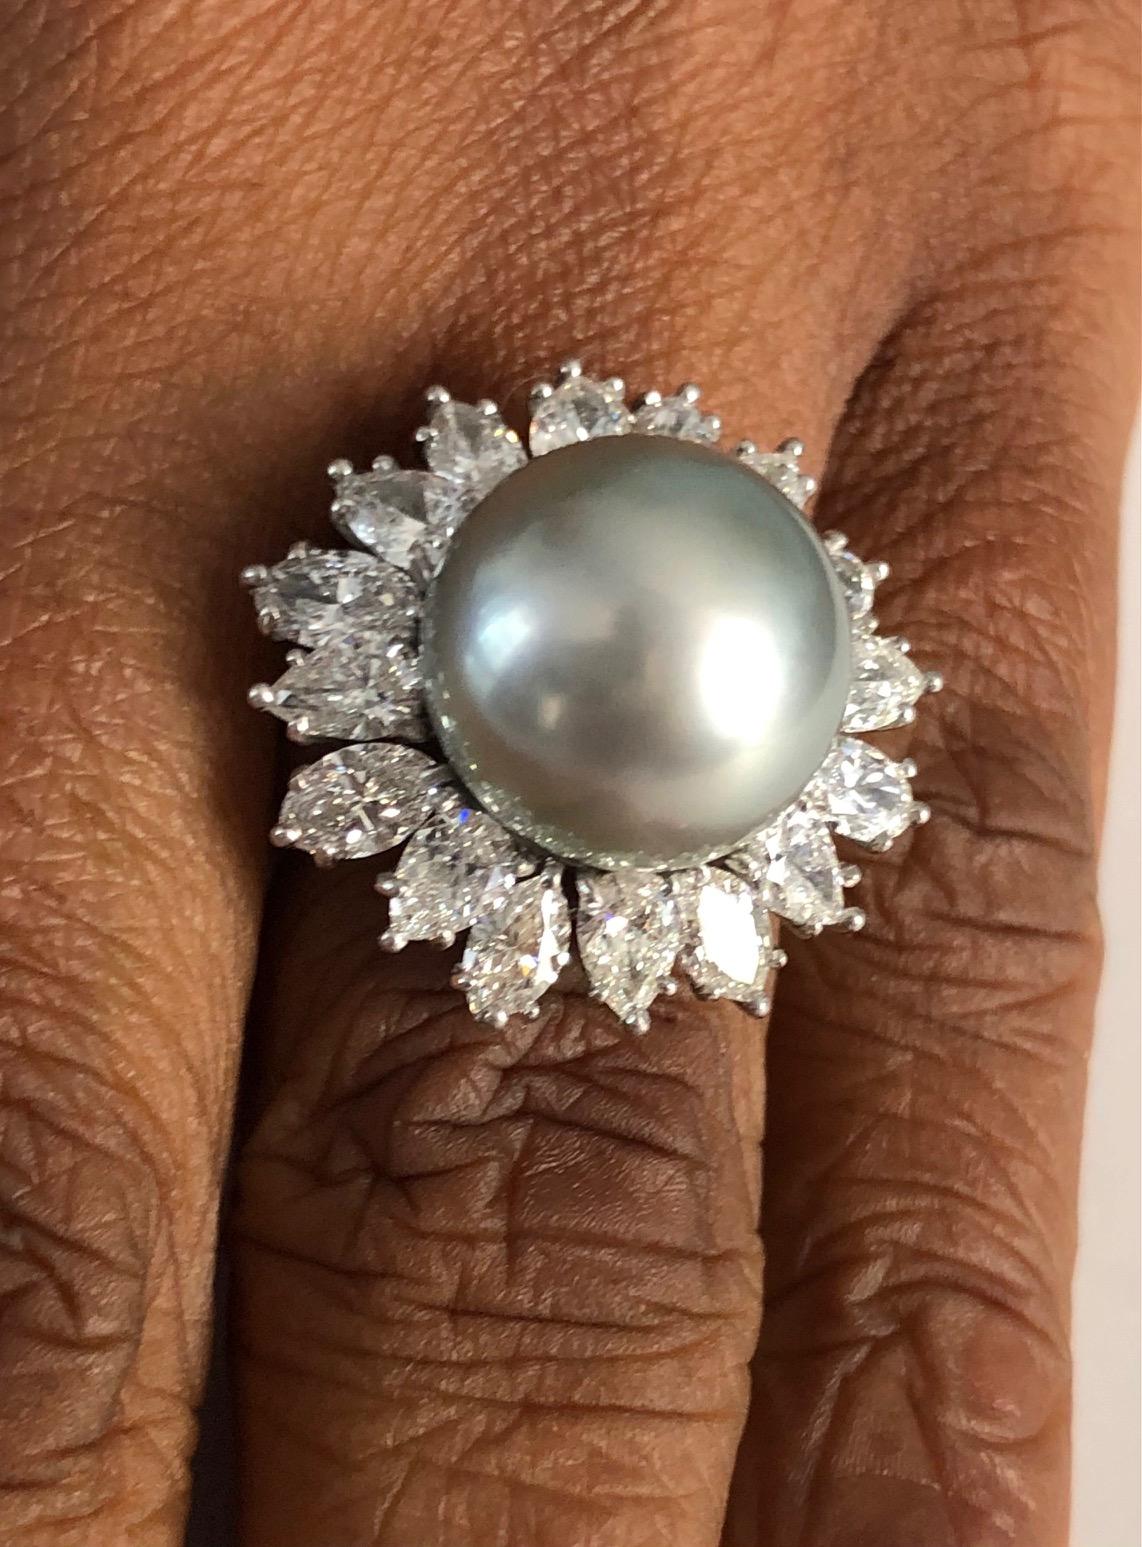 Handmade Platinum Ring, set with 16 extra fine Diamonds 3.38 carats and a High Quality Tahitian Pearls 13.4mm

We design and manufacture our jewelry in our workshop, located in New York City's diamond district.